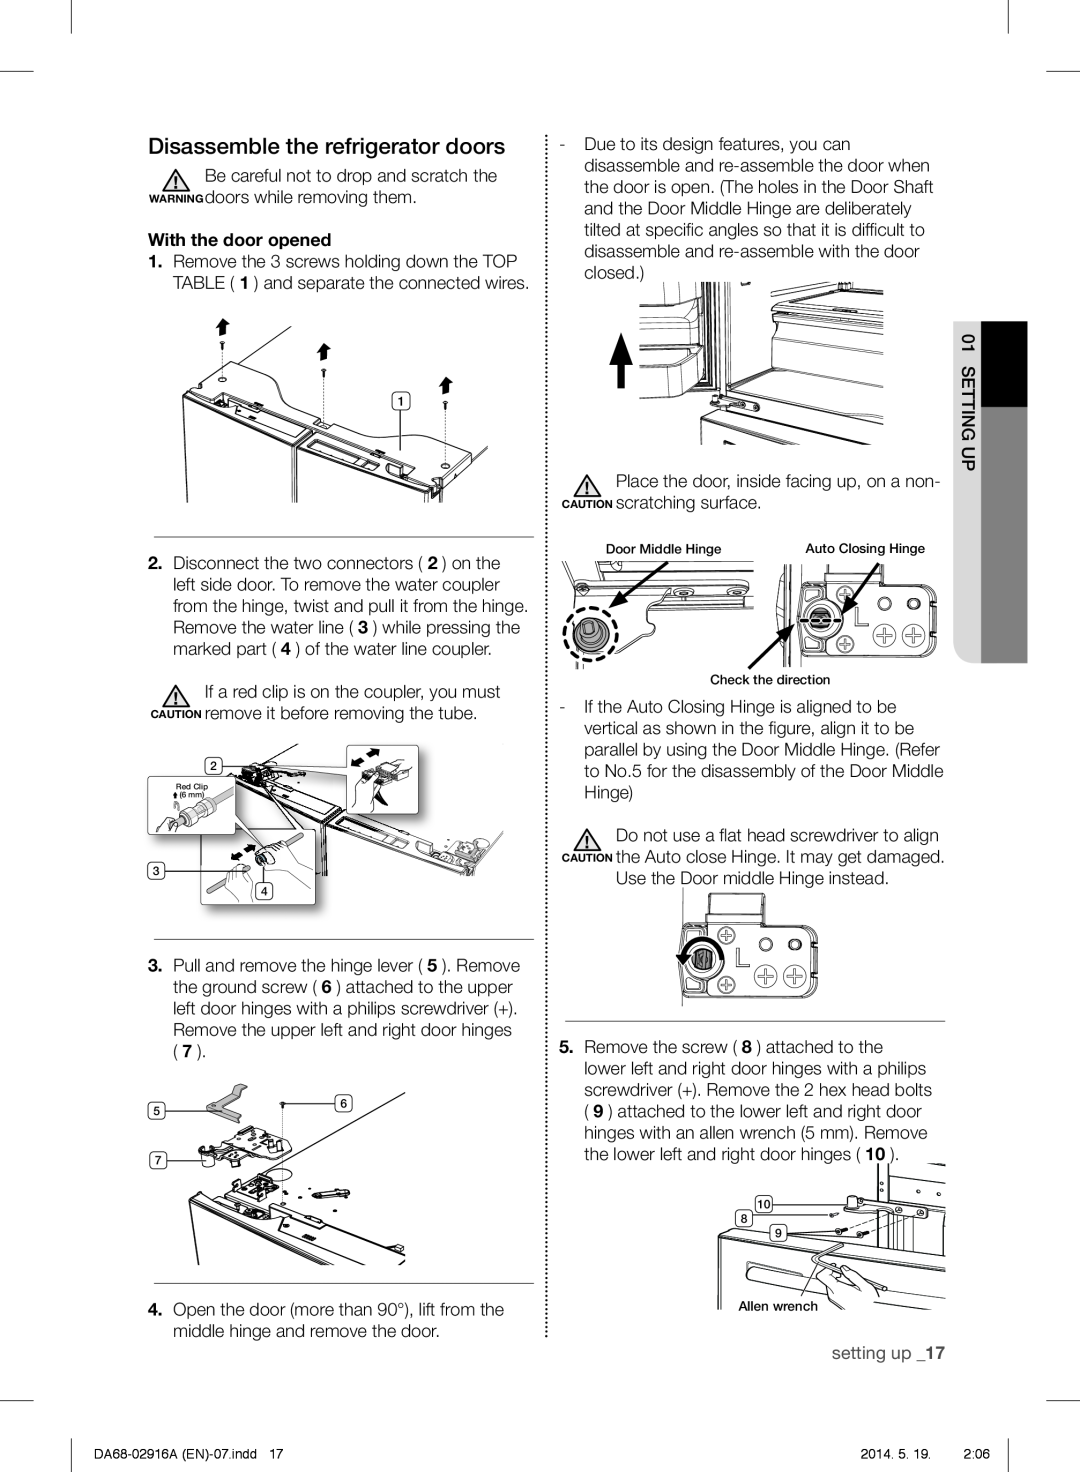 Samsung RF24FSEDBSR user manual Disassemble the refrigerator doors, With the door opened, setting up 